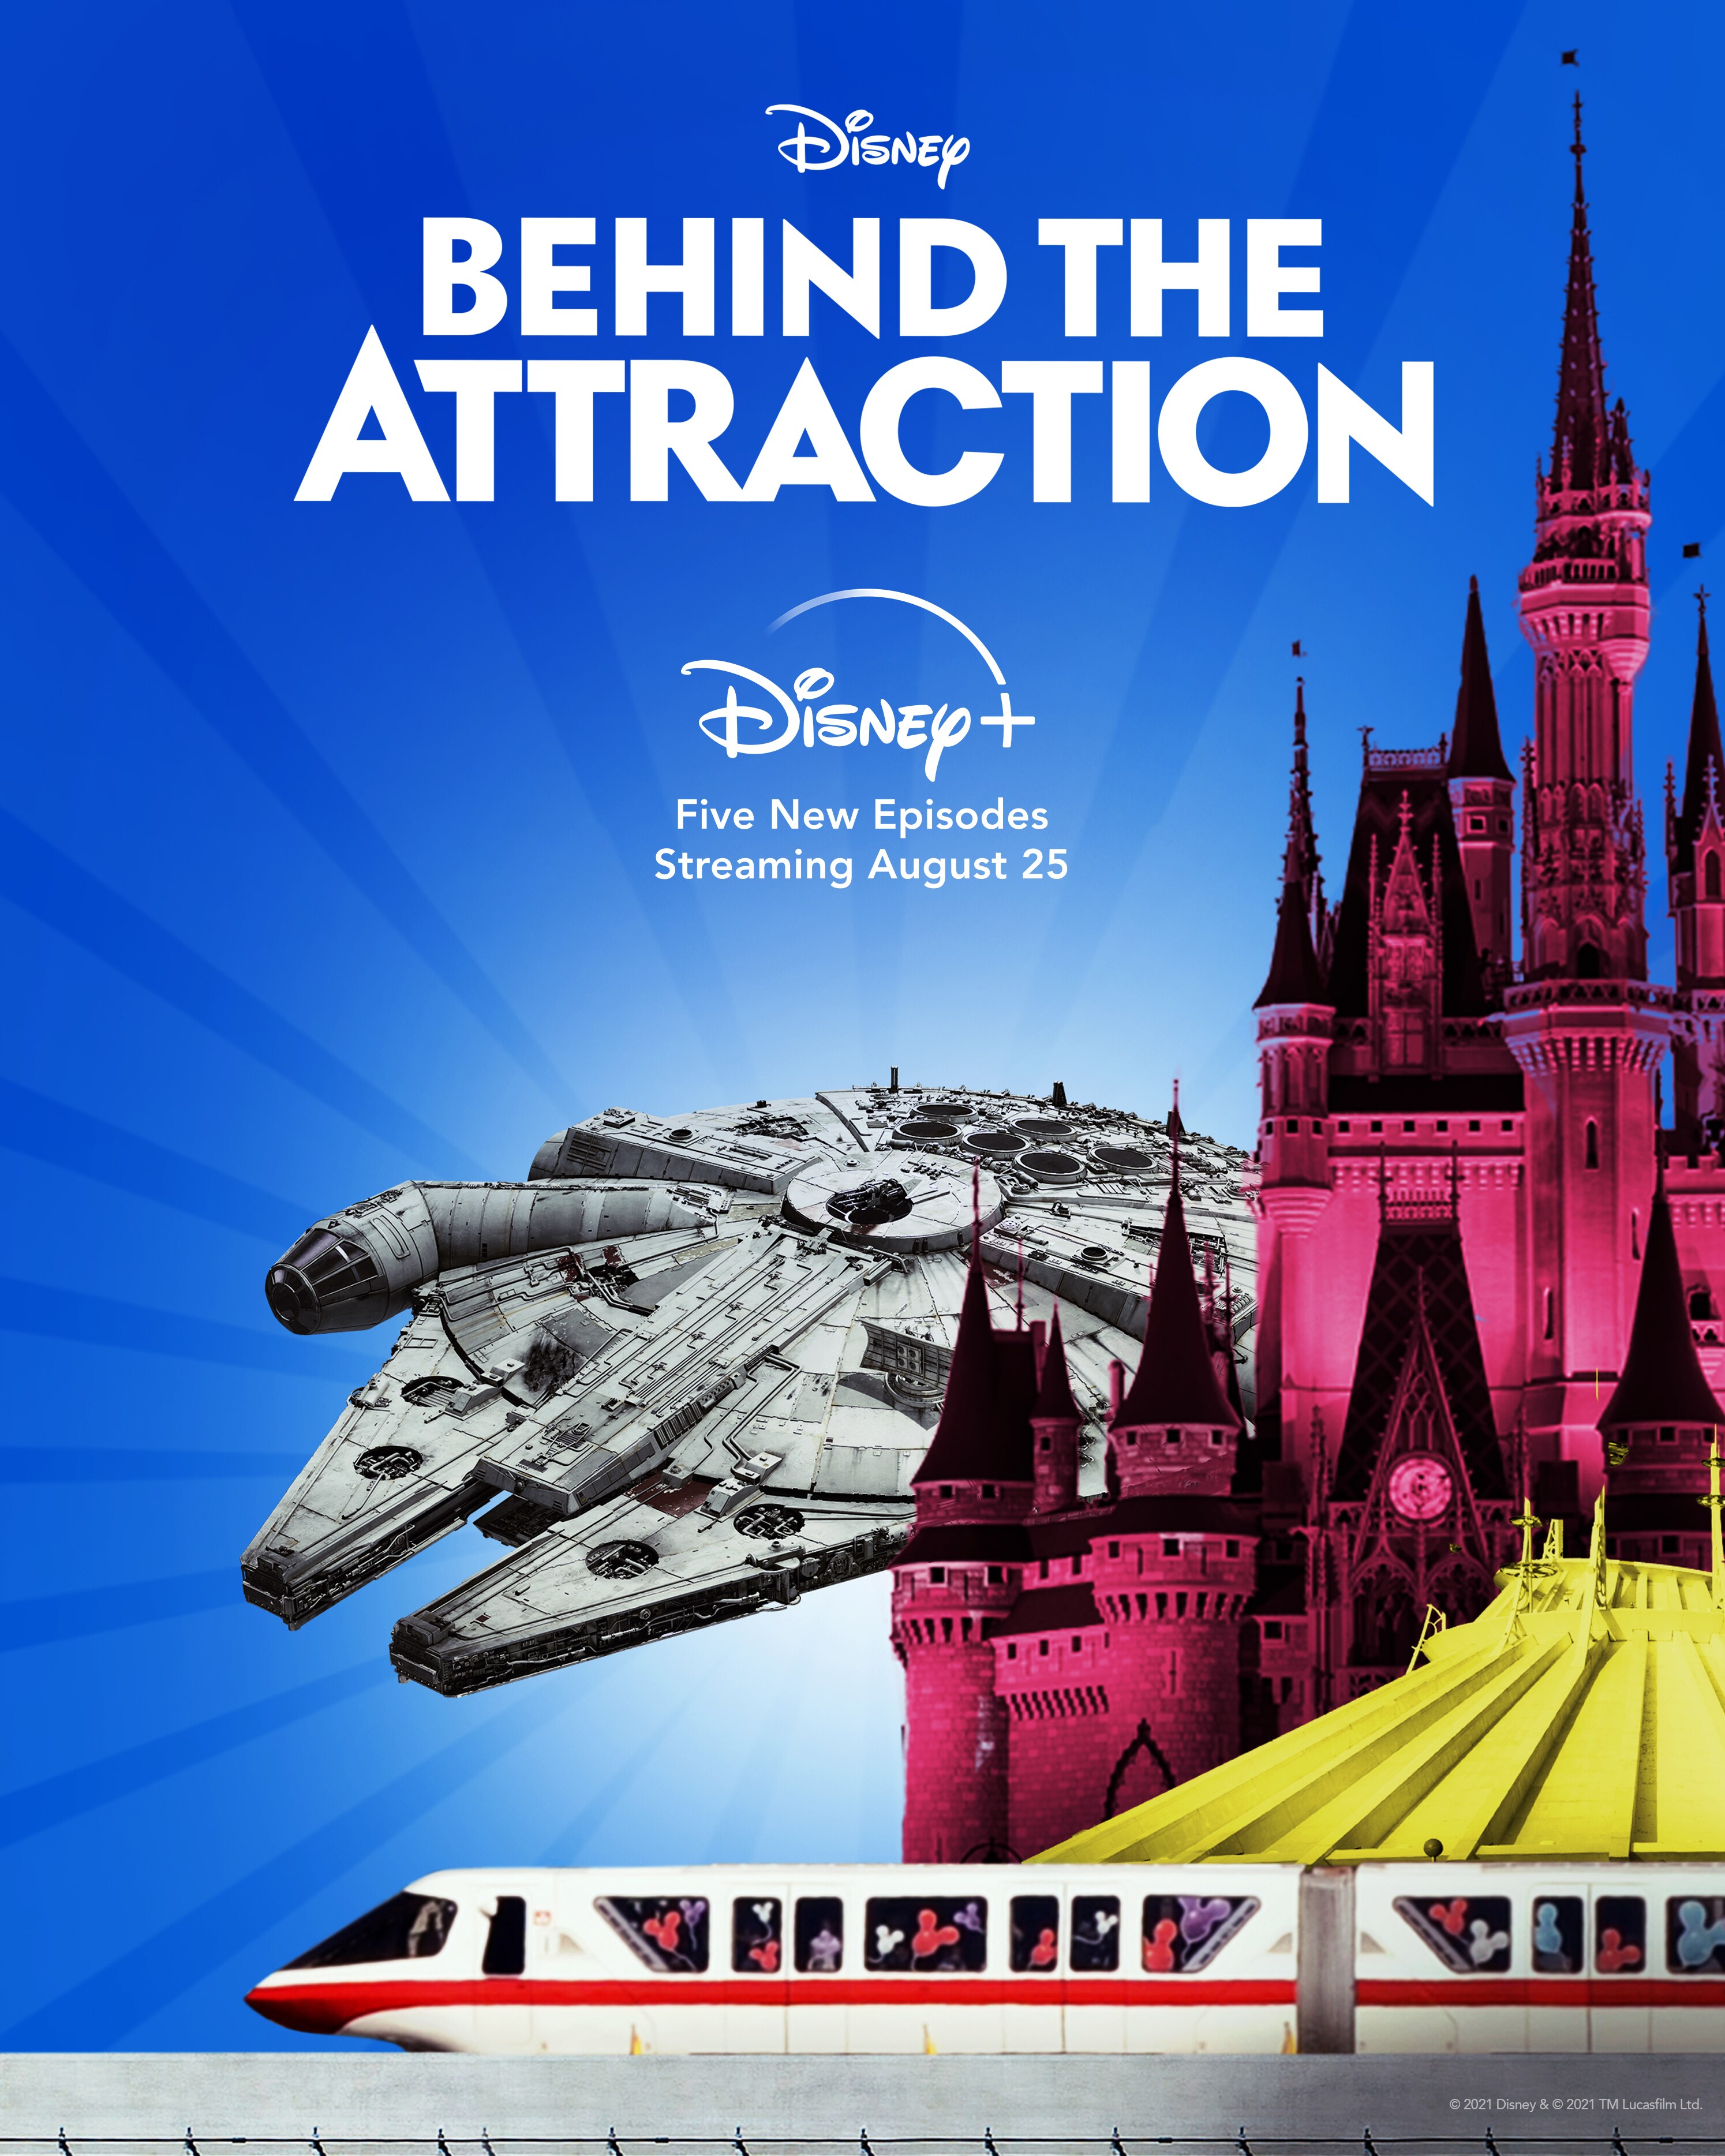 Five New Episodes Of The Disney+ Original Series ‘Behind The Attraction